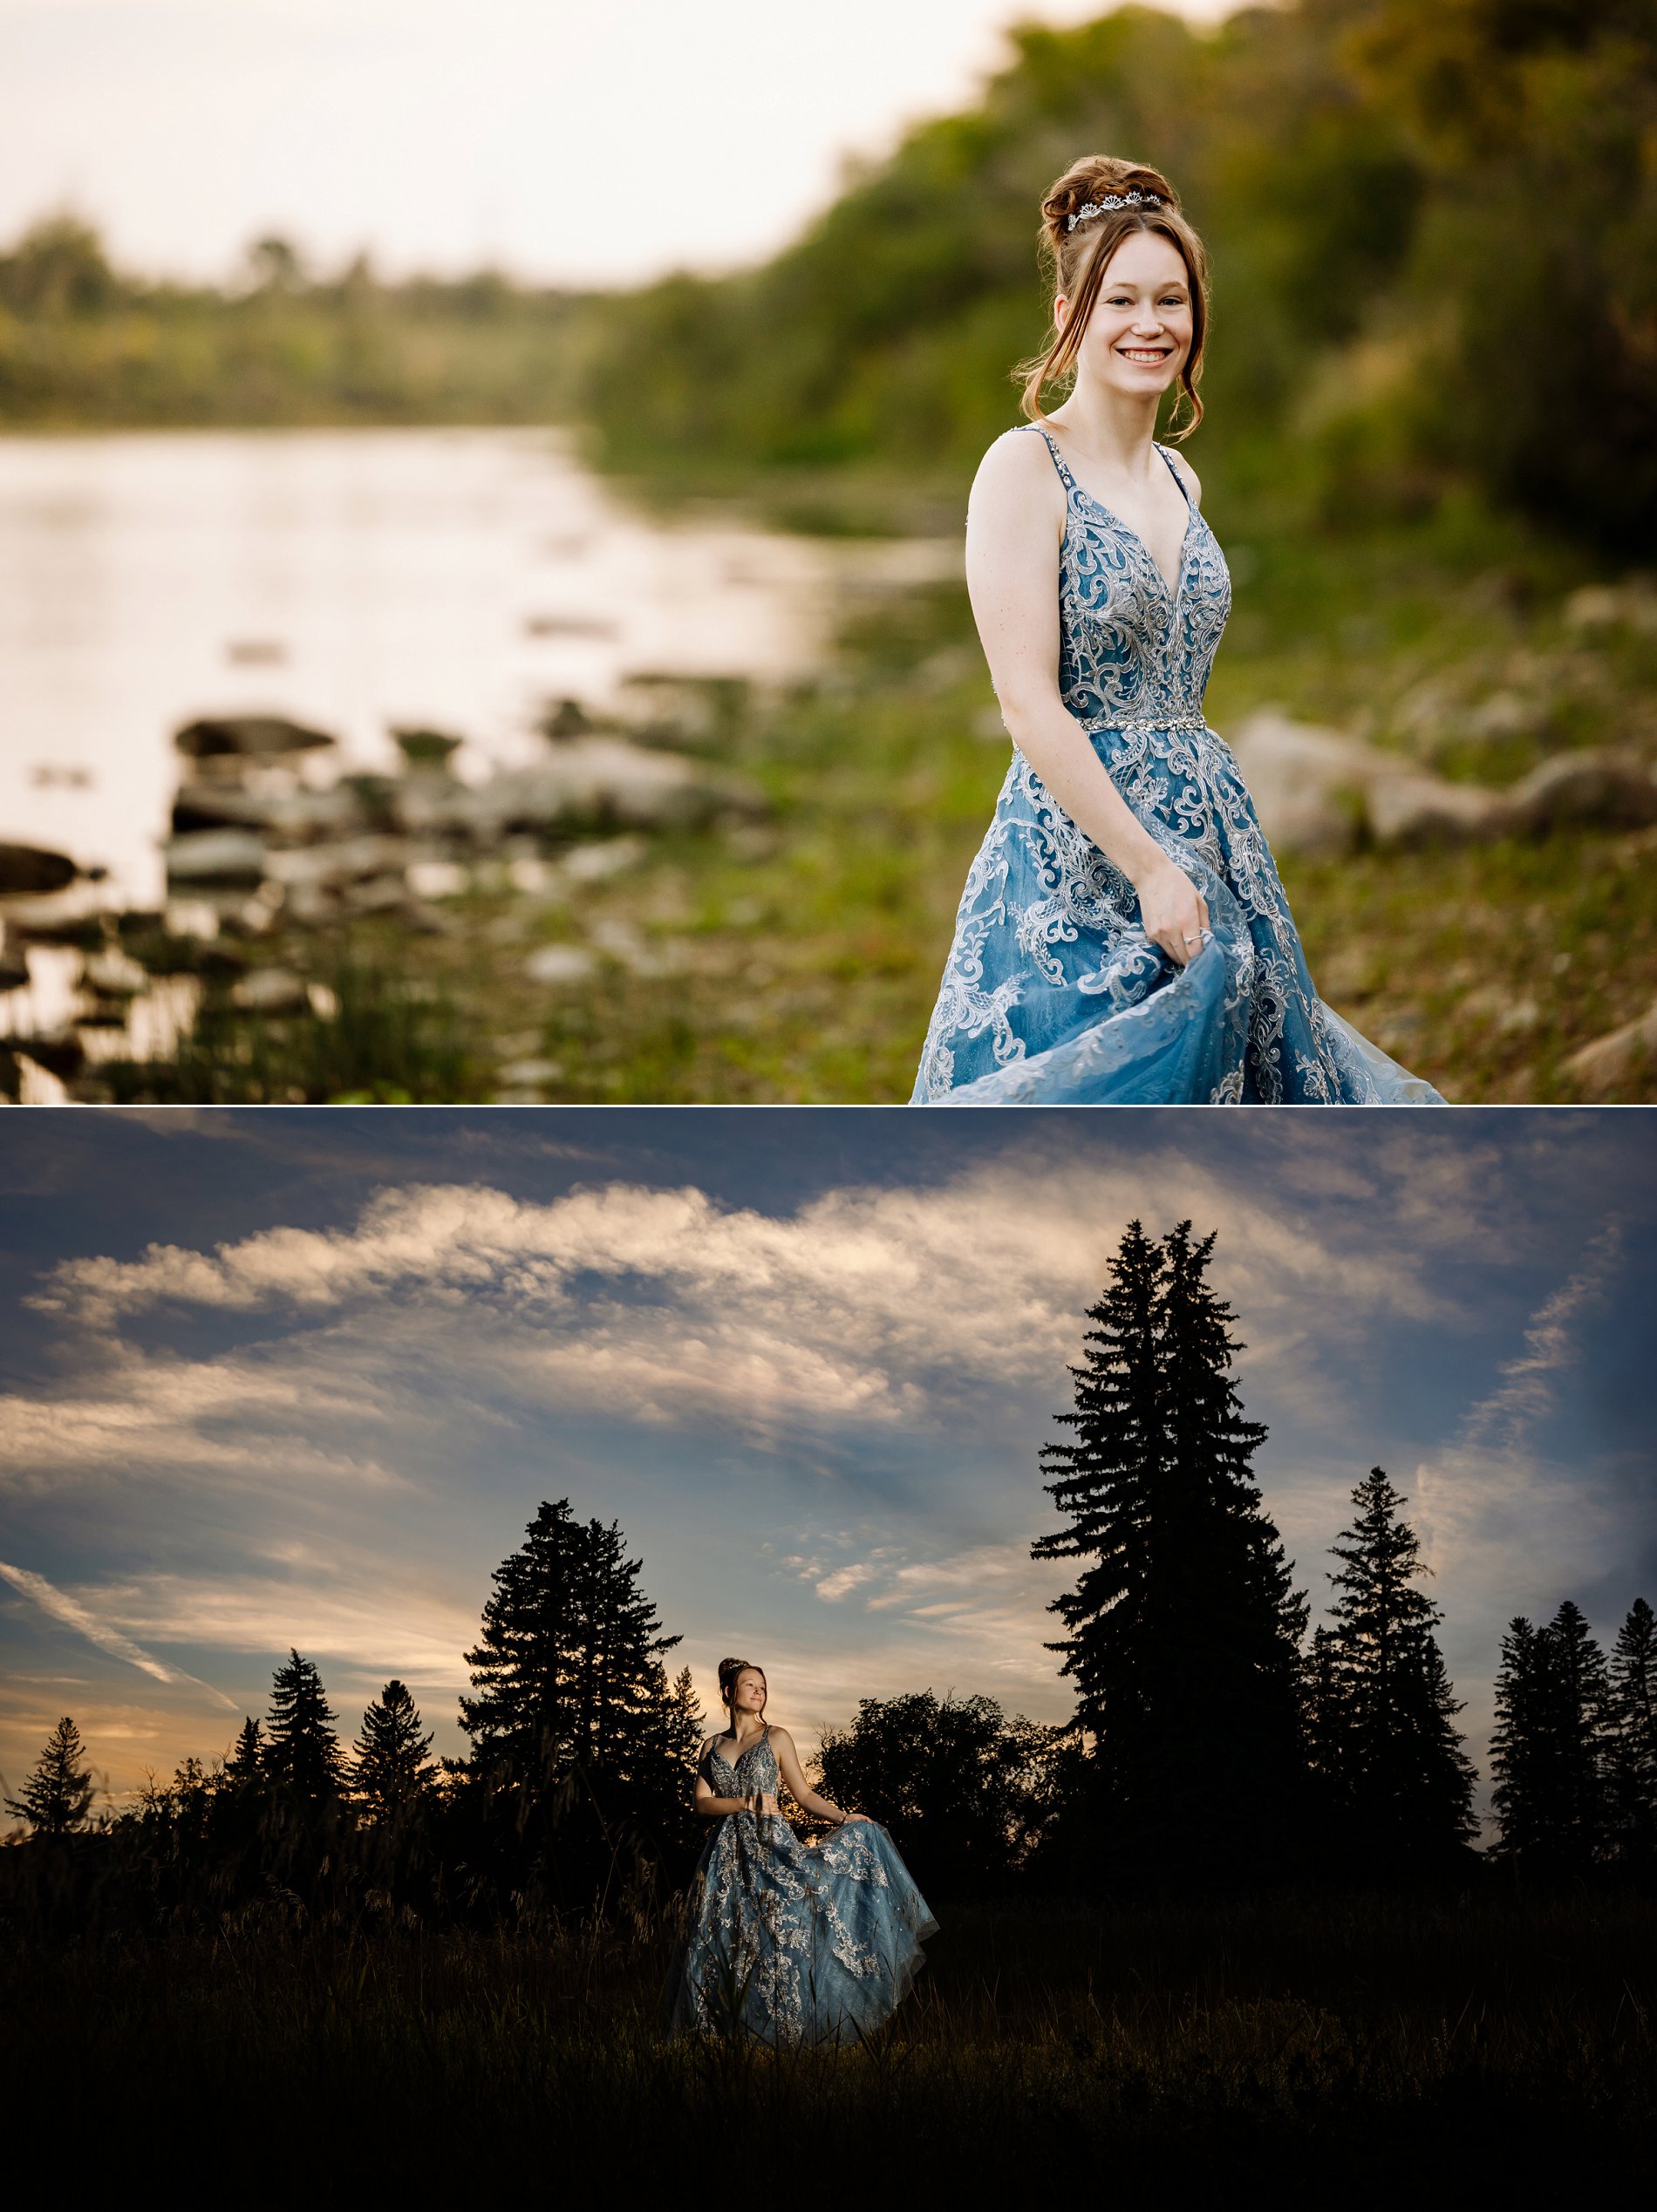 Graduate in a blue ball gown and tiara poses for her grad portraits on the river bank in downtown Saskatoon.